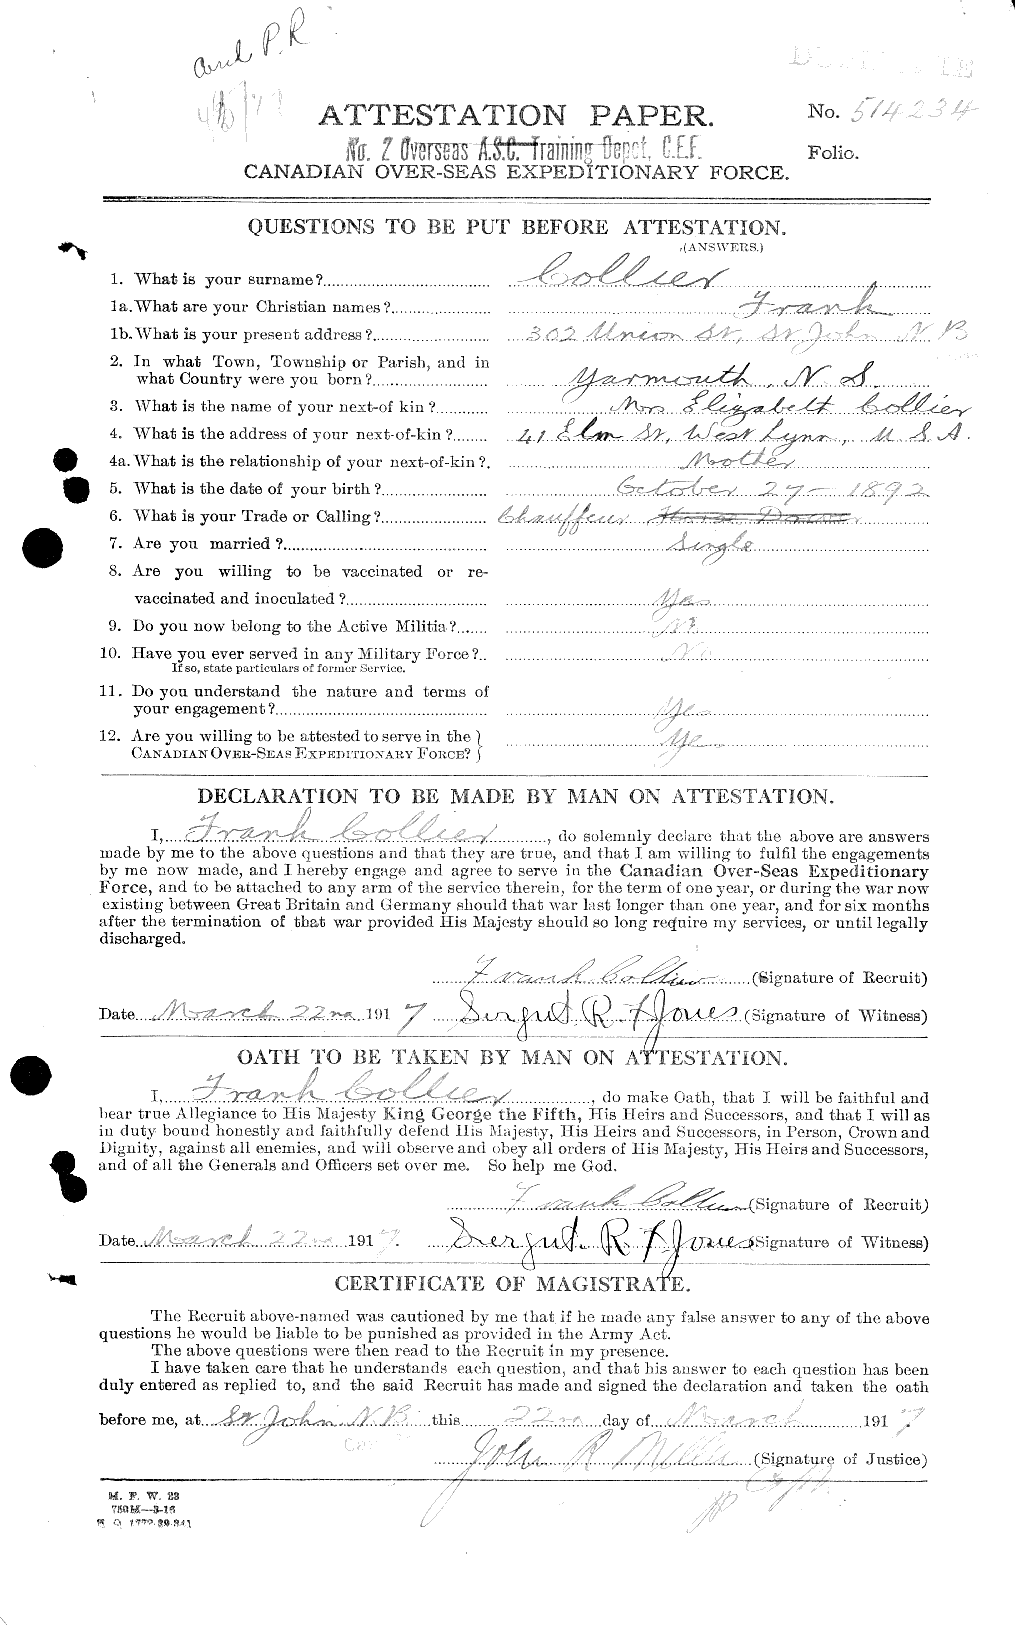 Personnel Records of the First World War - CEF 028793a